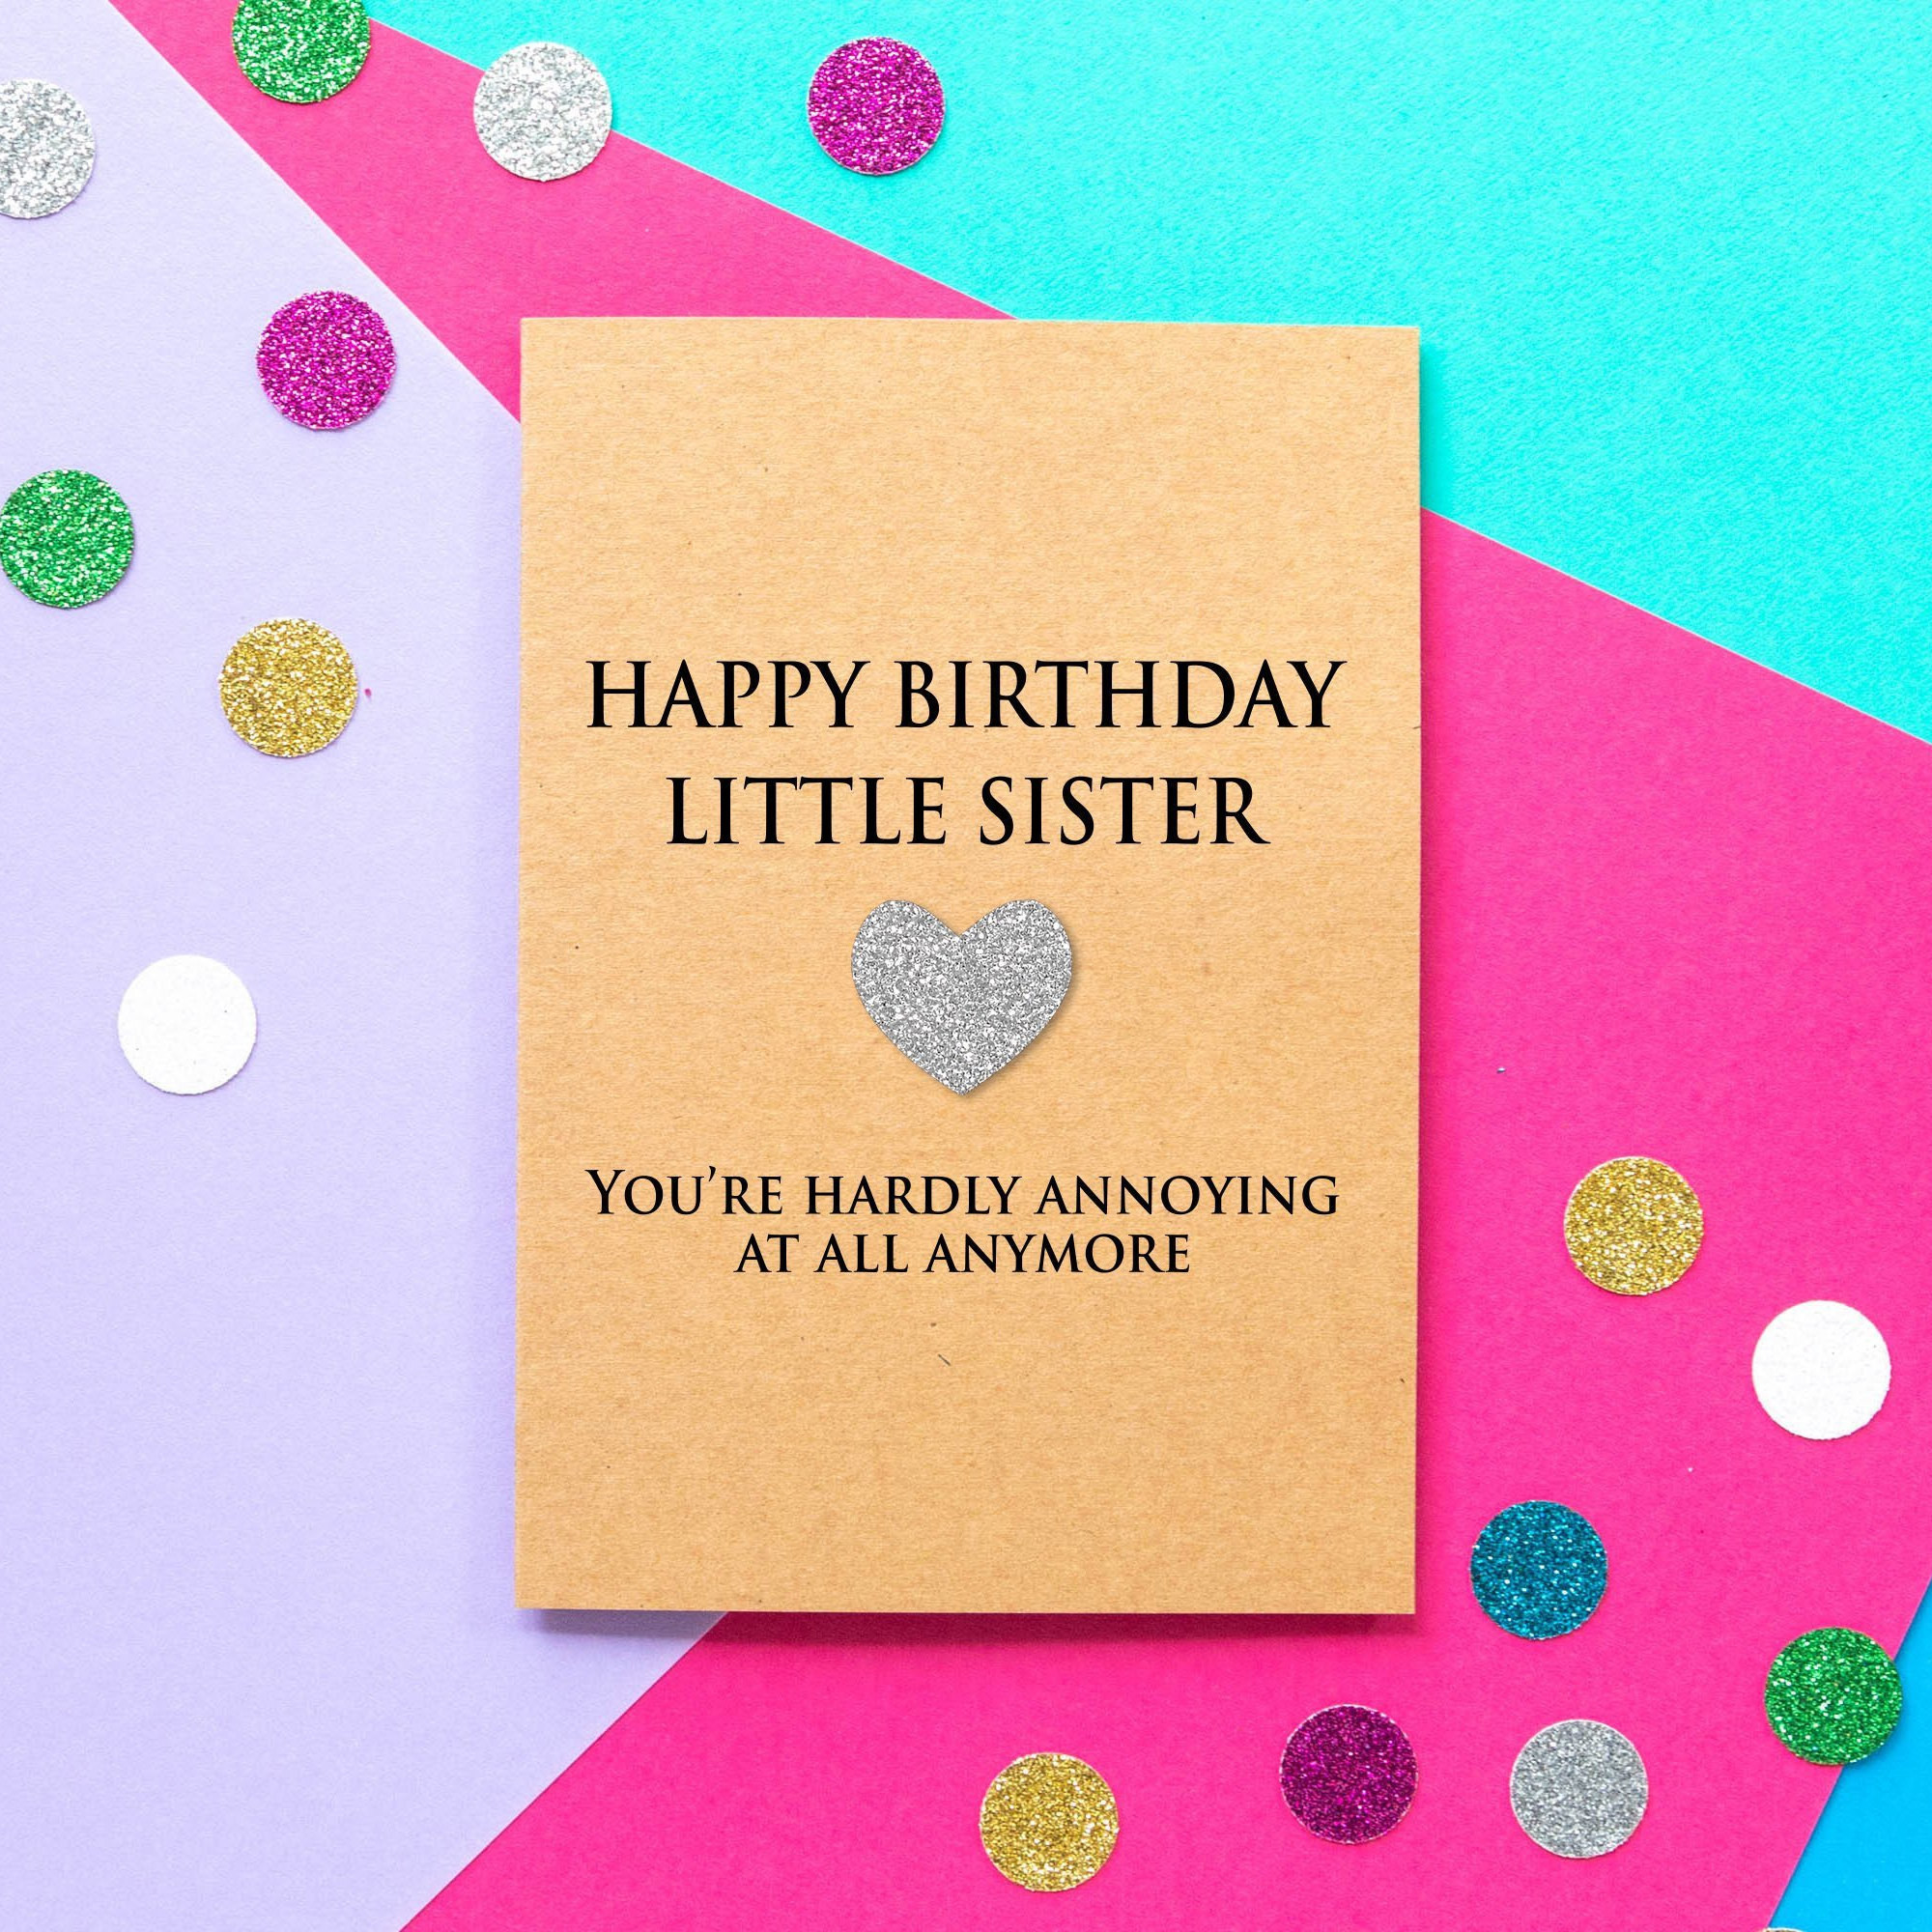 Funny Birthday Cards For Sisters
 Funny Little Sister Birthday Card You re Hardly Annoying